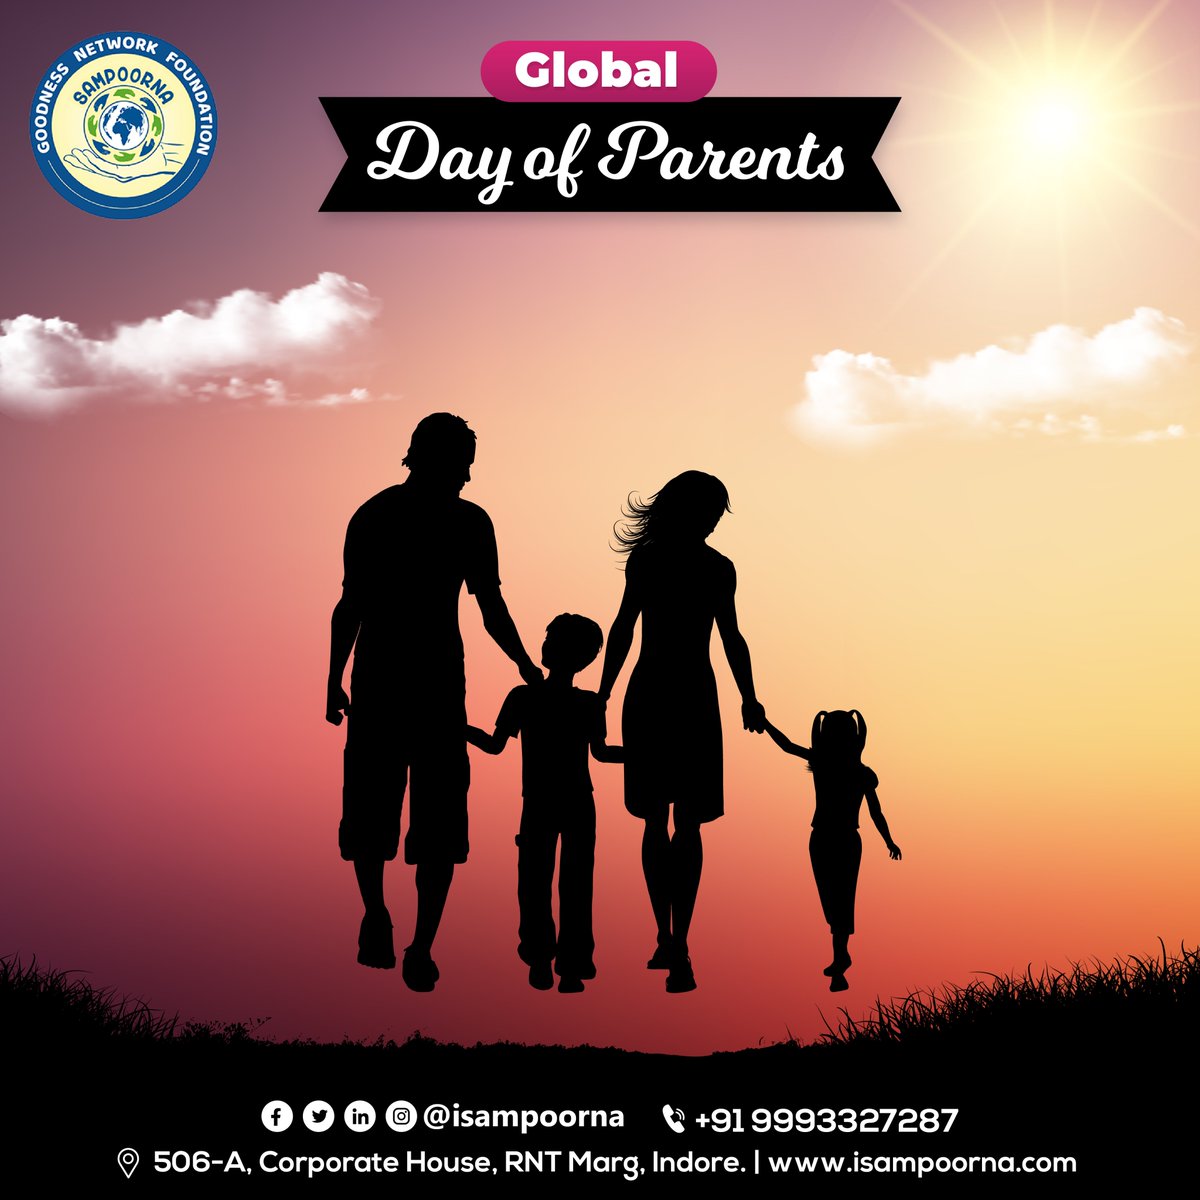 On the Global Day of Parents, let's celebrate the beautiful bond that holds us together. Cherish your parents and make them feel loved and appreciated. 💞🌍

#GlobalDayofParents #FamilyBonds #familyforever #charity #isampoorna